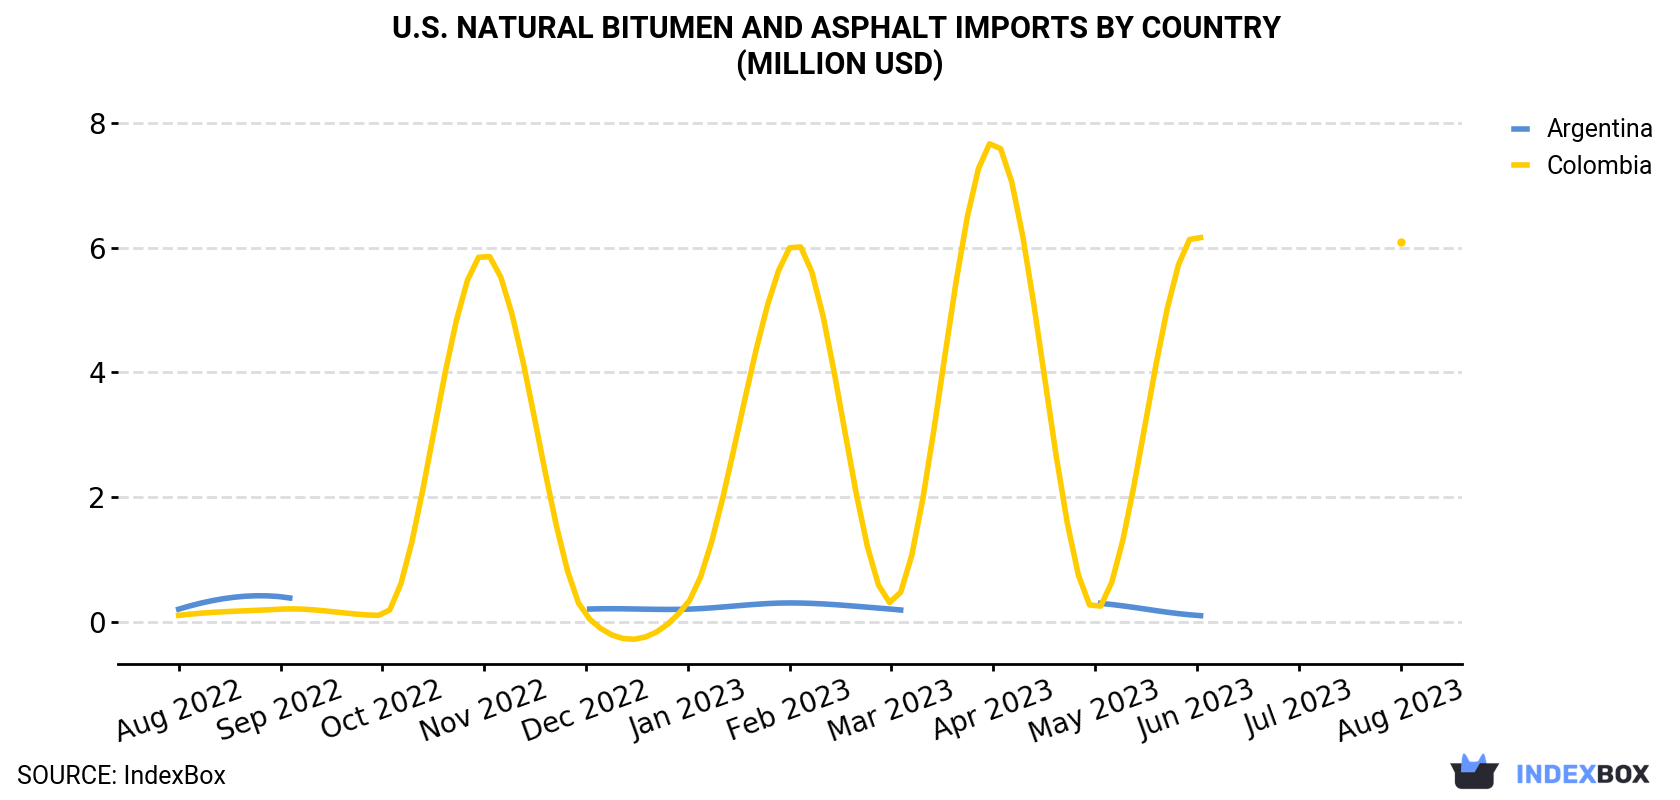 U.S. Natural Bitumen and Asphalt Imports By Country (Million USD)